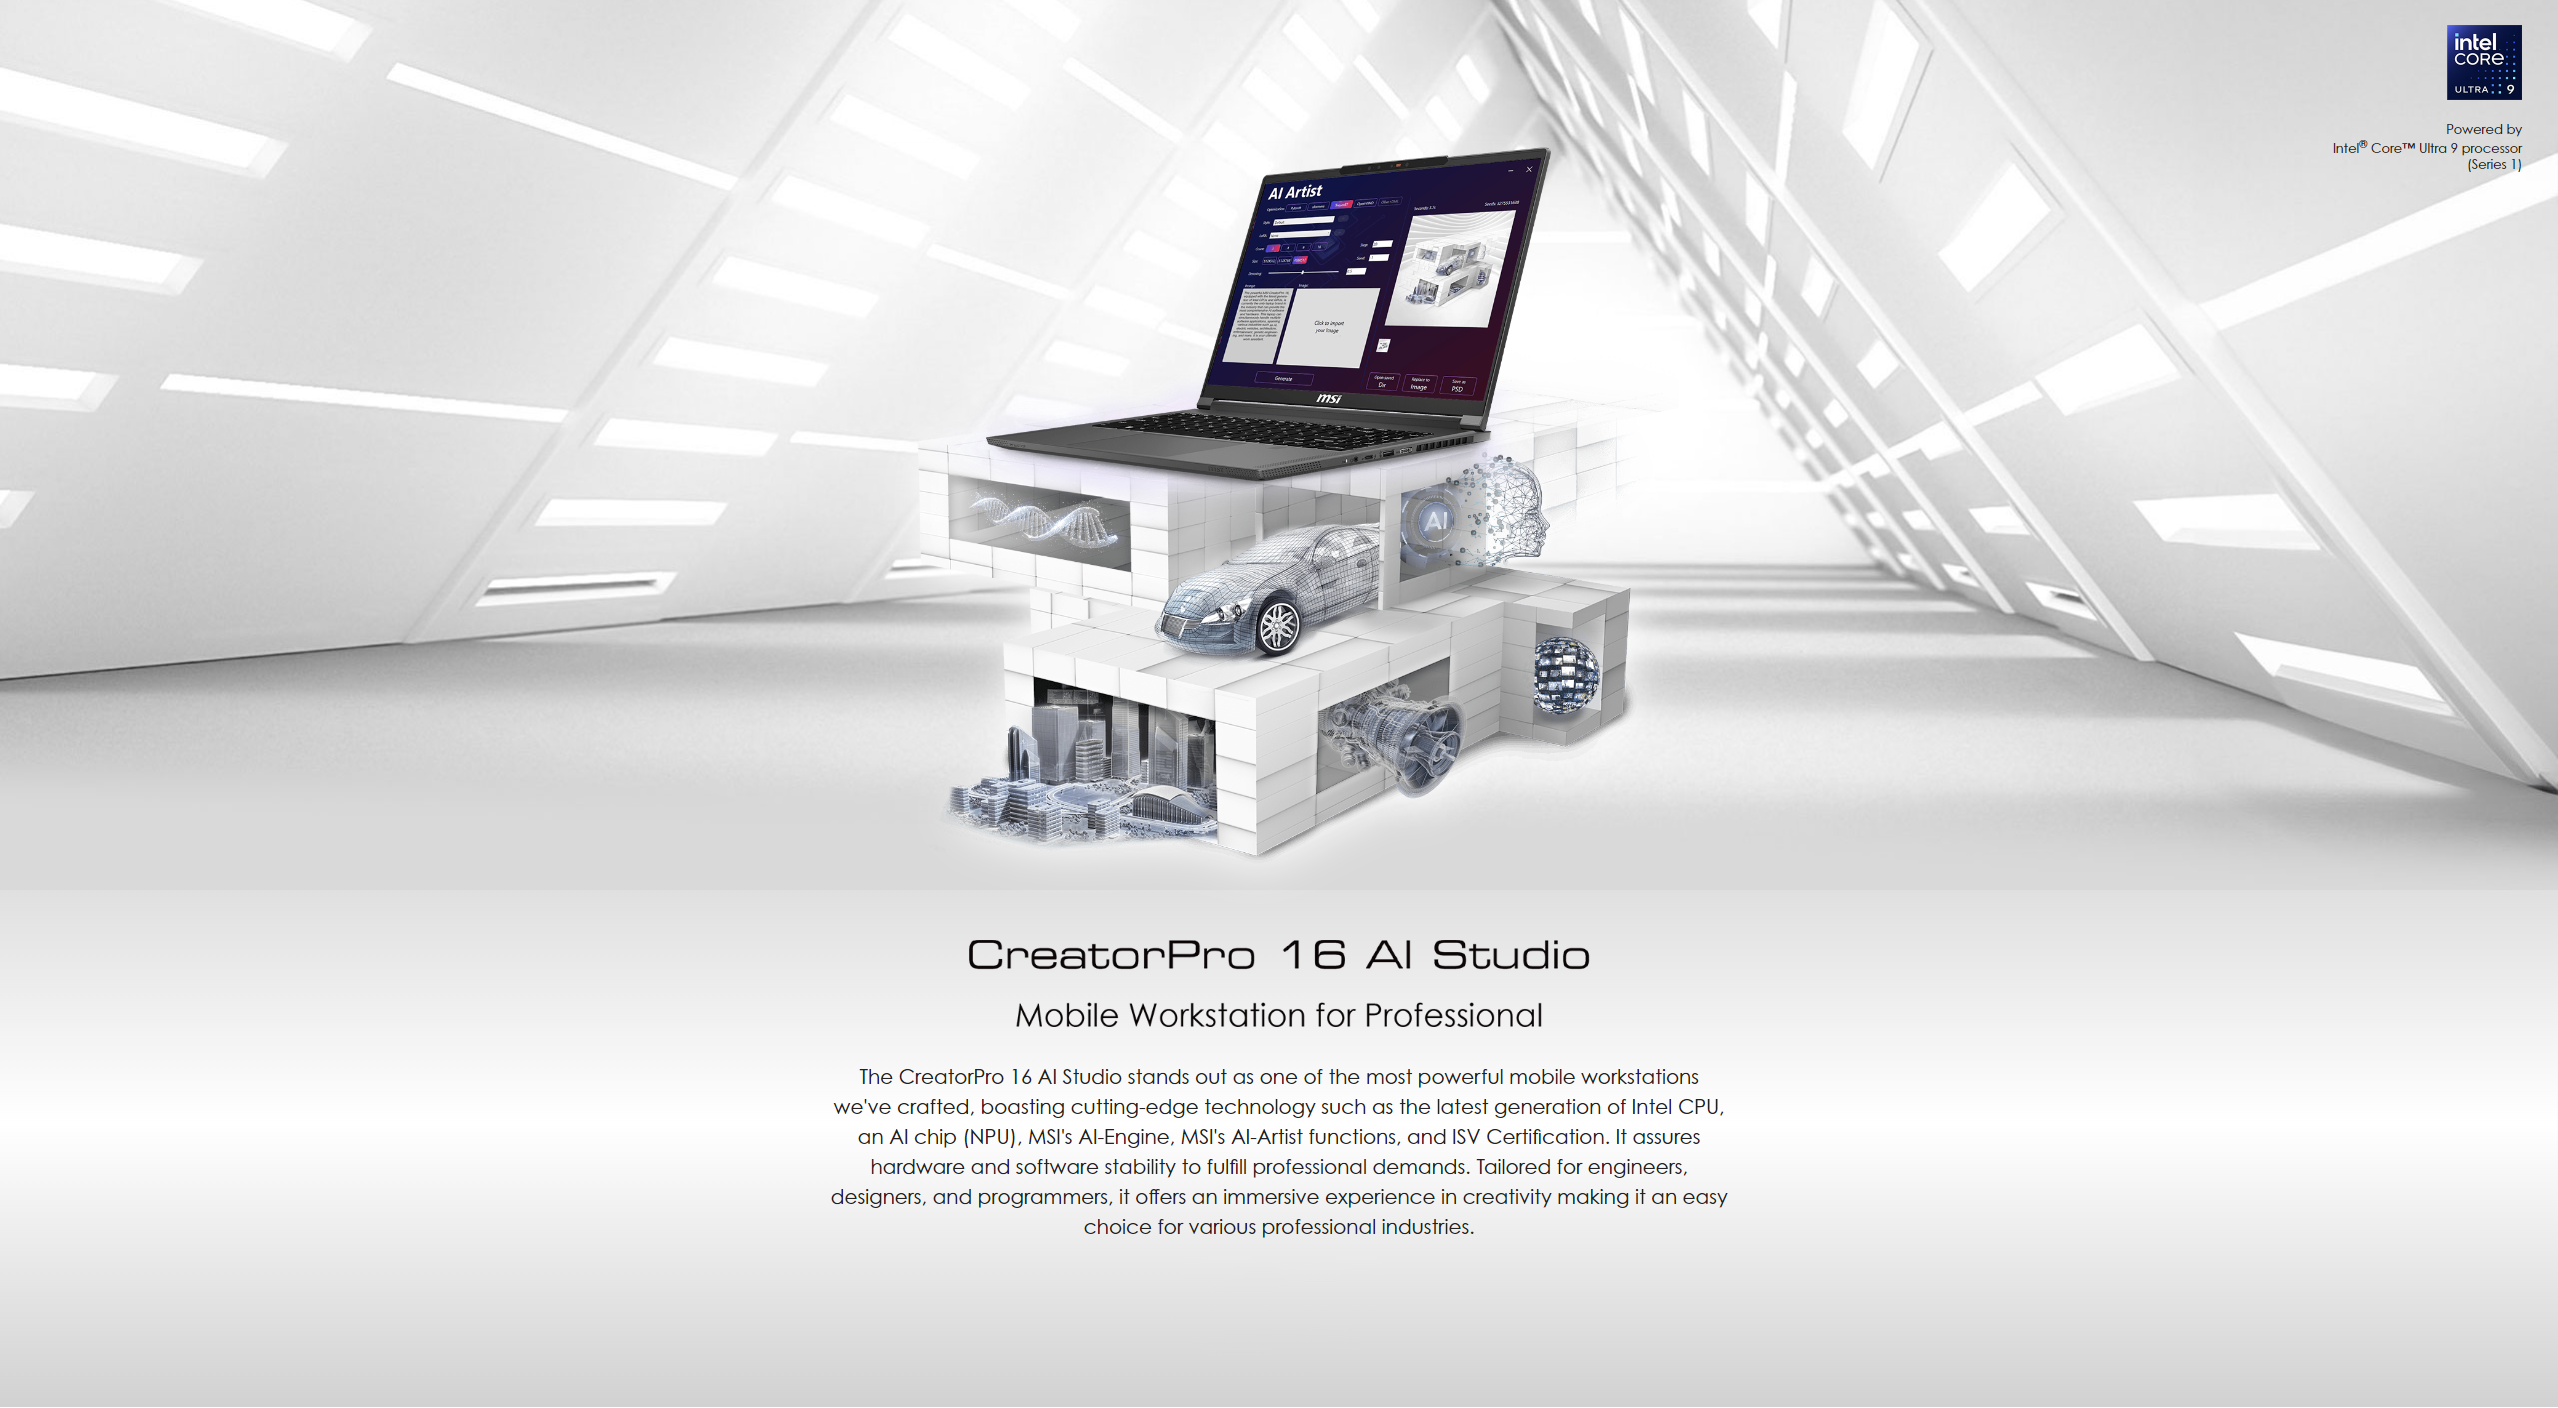 The CreatorPro 16 AI Studio stands out as one of the most powerful mobile workstations we've crafted, boasting cutting-edge technology such as the latest generation of Intel CPU, an AI chip (NPU), MSI's AI-Engine, MSI's AI-Artist functions, and ISV Certification. It assures hardware and software stability to fulfill professional demands. Tailored for engineers, designers, and programmers, it offers an immersive experience in creativity making it an easy choice for various professional industries.